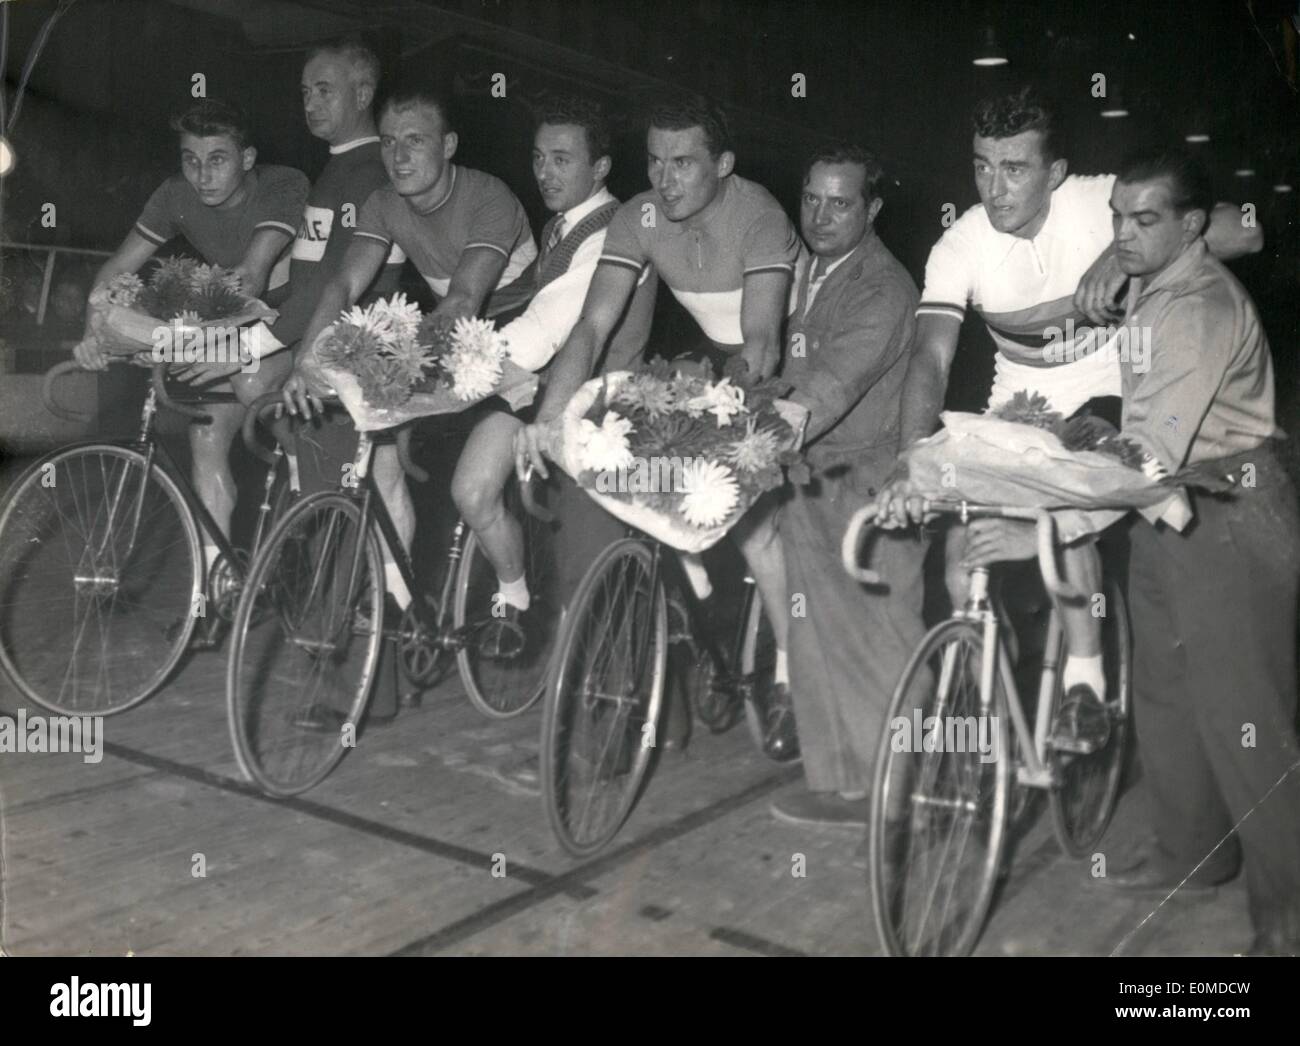 Oct. 10, 1954 - Left to right: Bobet, Bellenger, Darricade, and Jacques Anquetil. Mario Scelba with Maria Pia de Gasperi after her father's Death Stock Photo